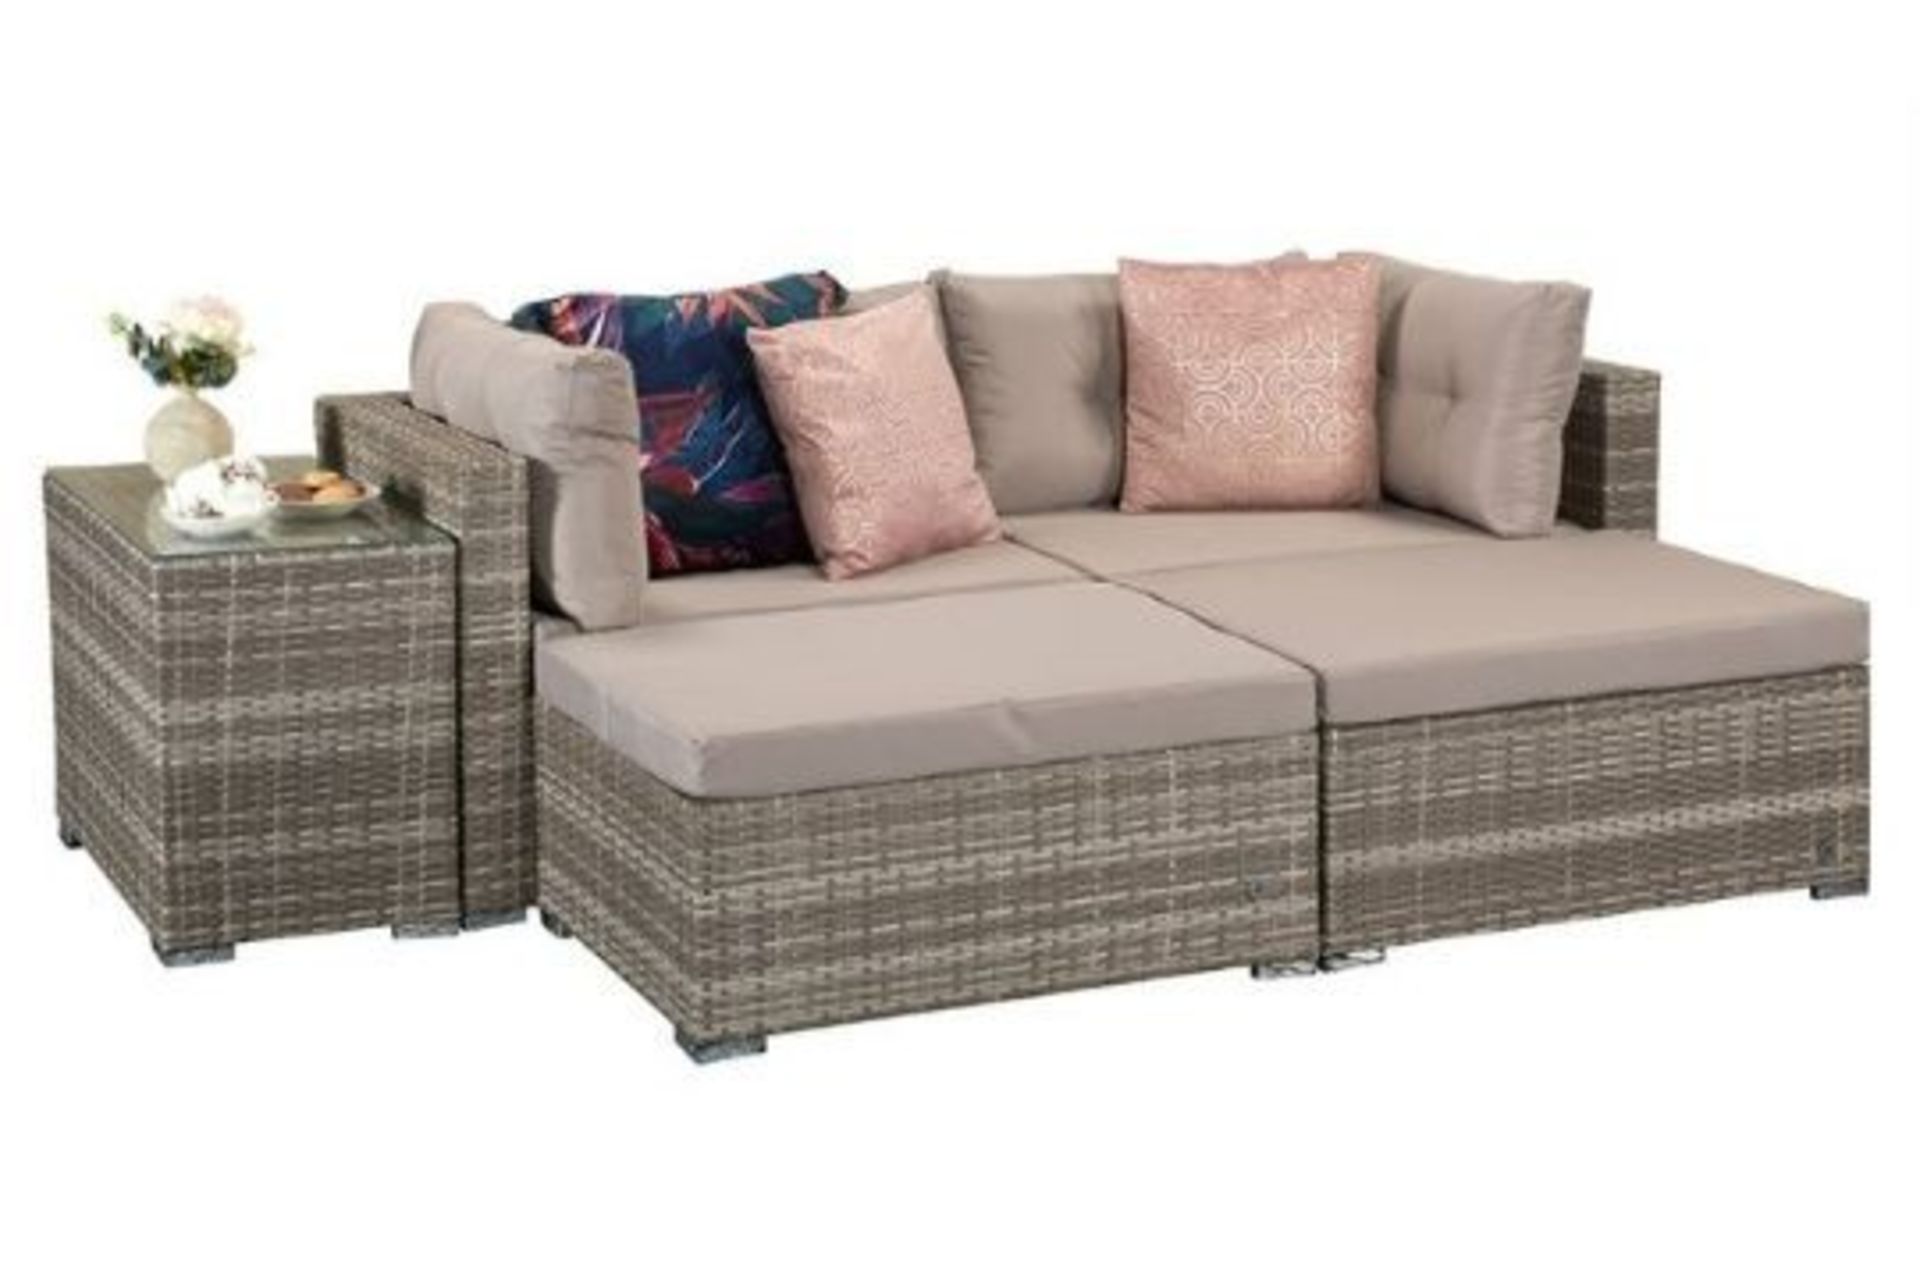 New & Boxed Luxury Signature Weave Garden UV Treated Rattan Harper Grey Stackable Multifunctional - Image 3 of 5